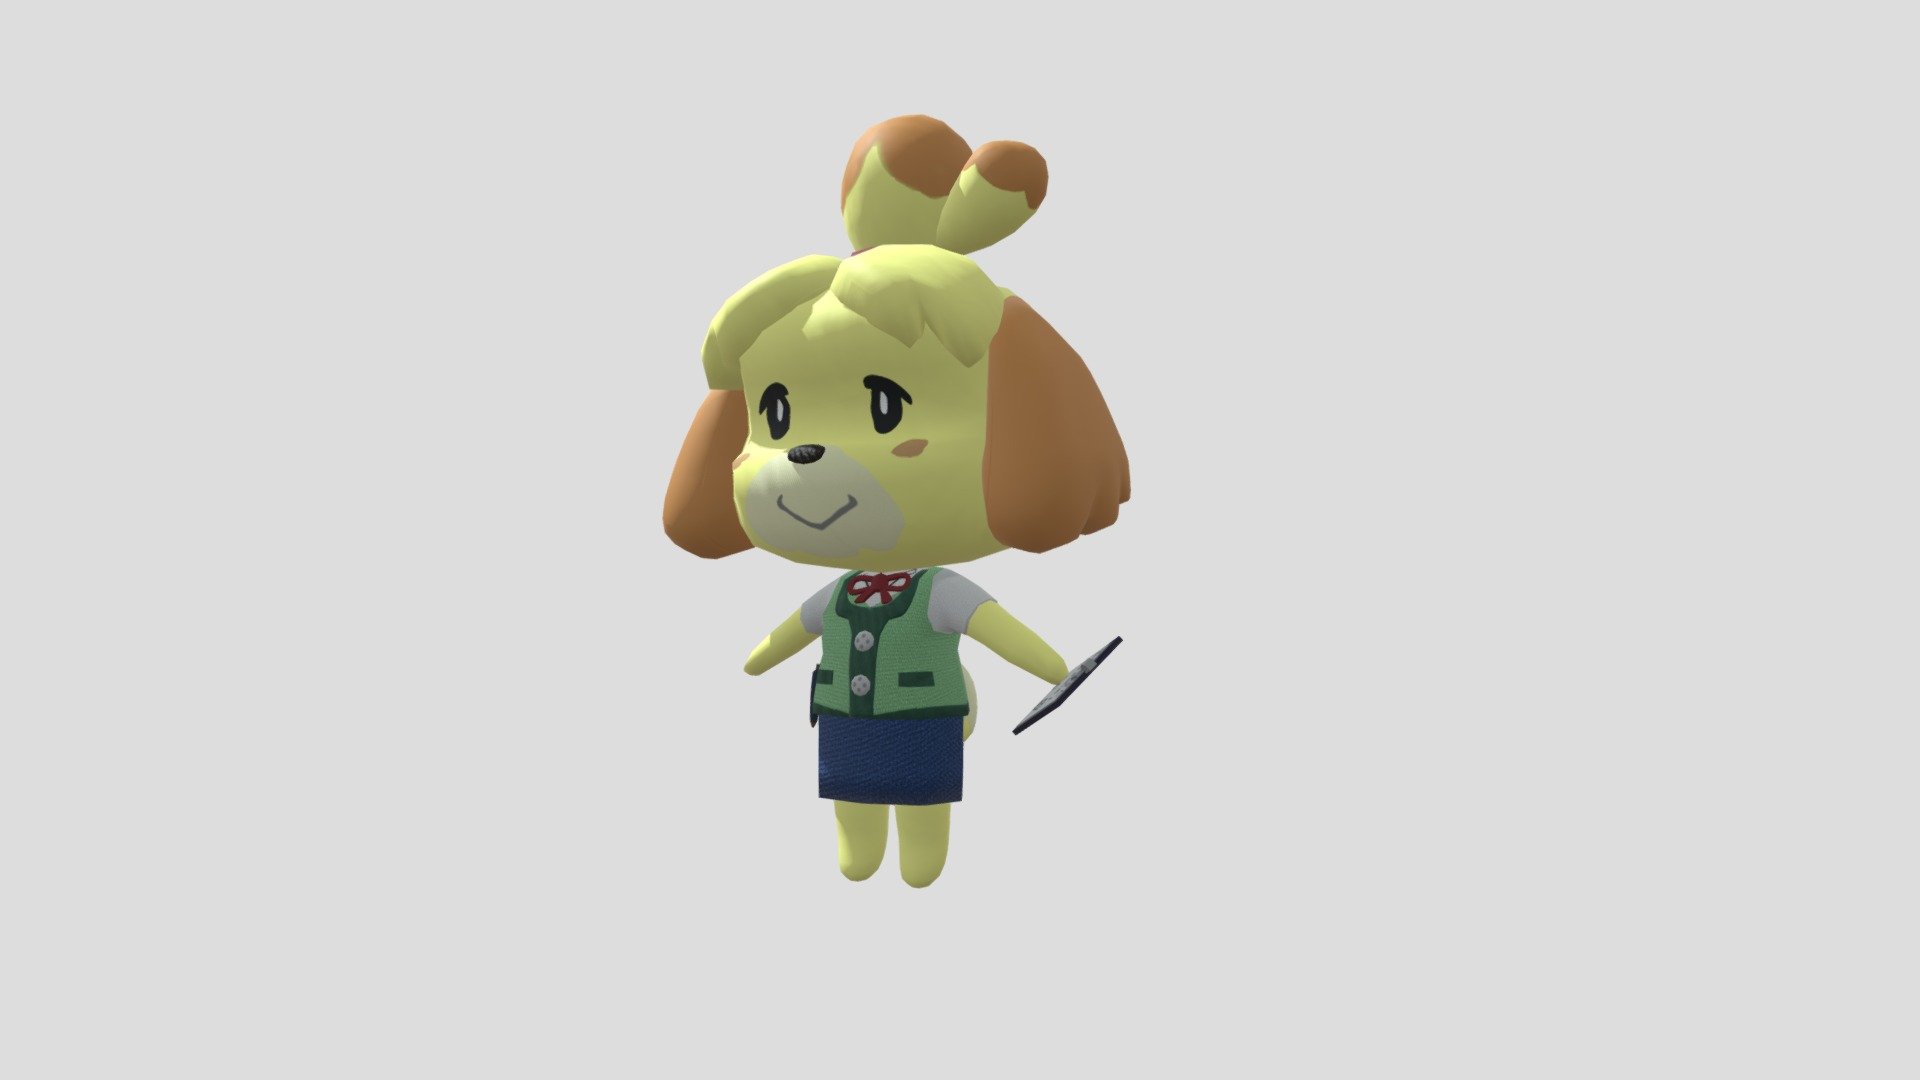 Animal crossing isabelle Isabelle in